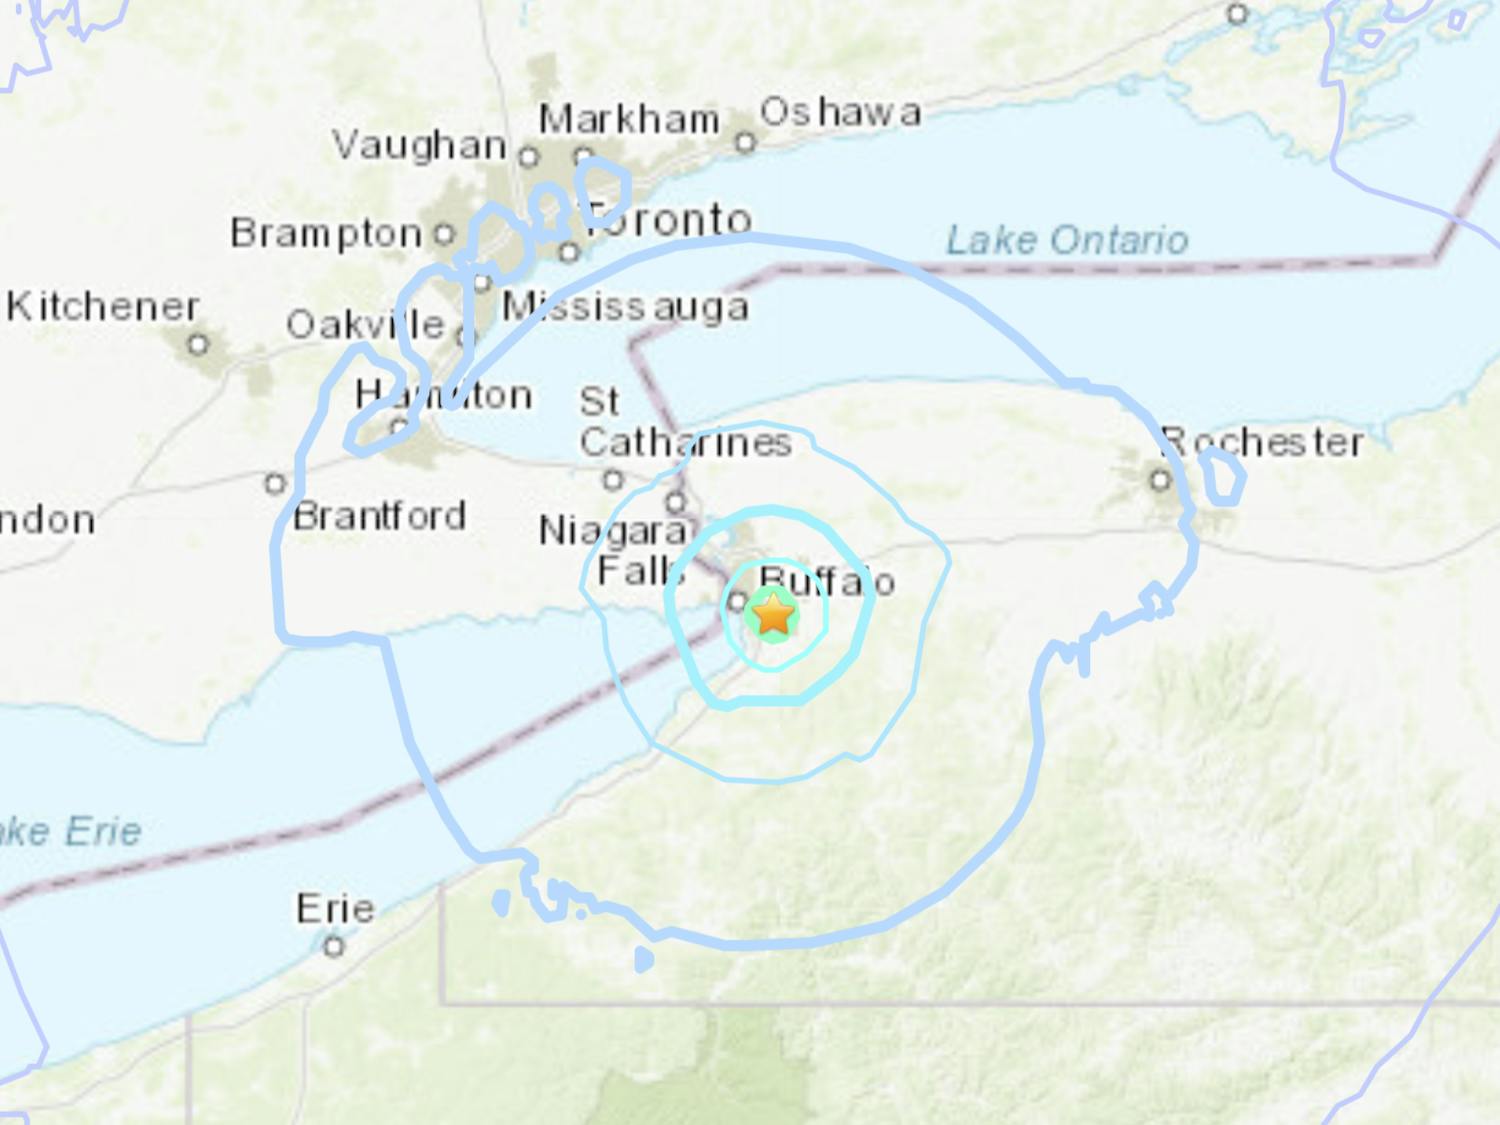 USGS map displaying the areas affected by the 3.8 magnitude earthquake.